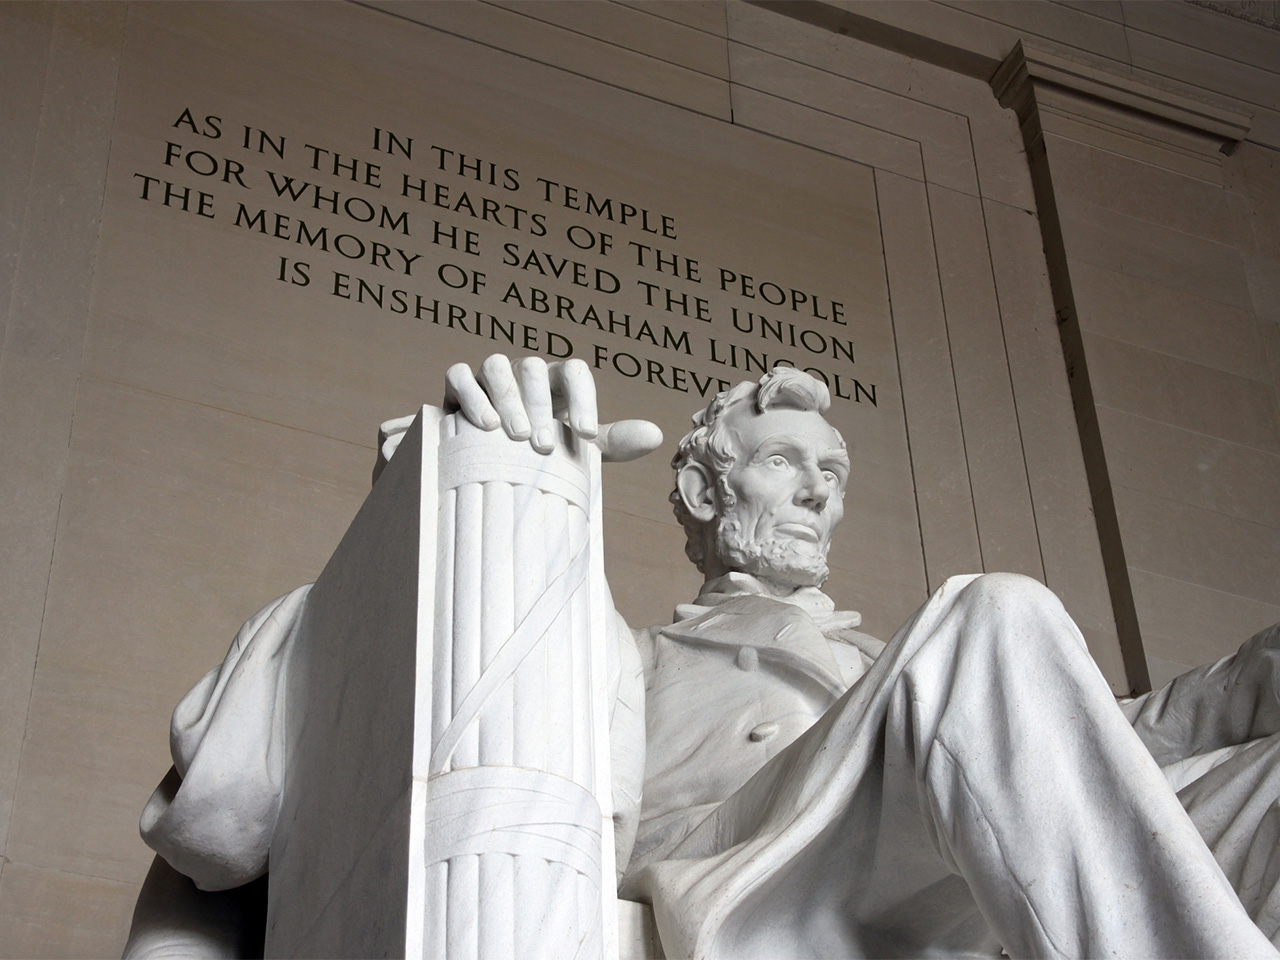 Looking up at the sculpture of Abraham Lincoln at the Lincoln Memorial.